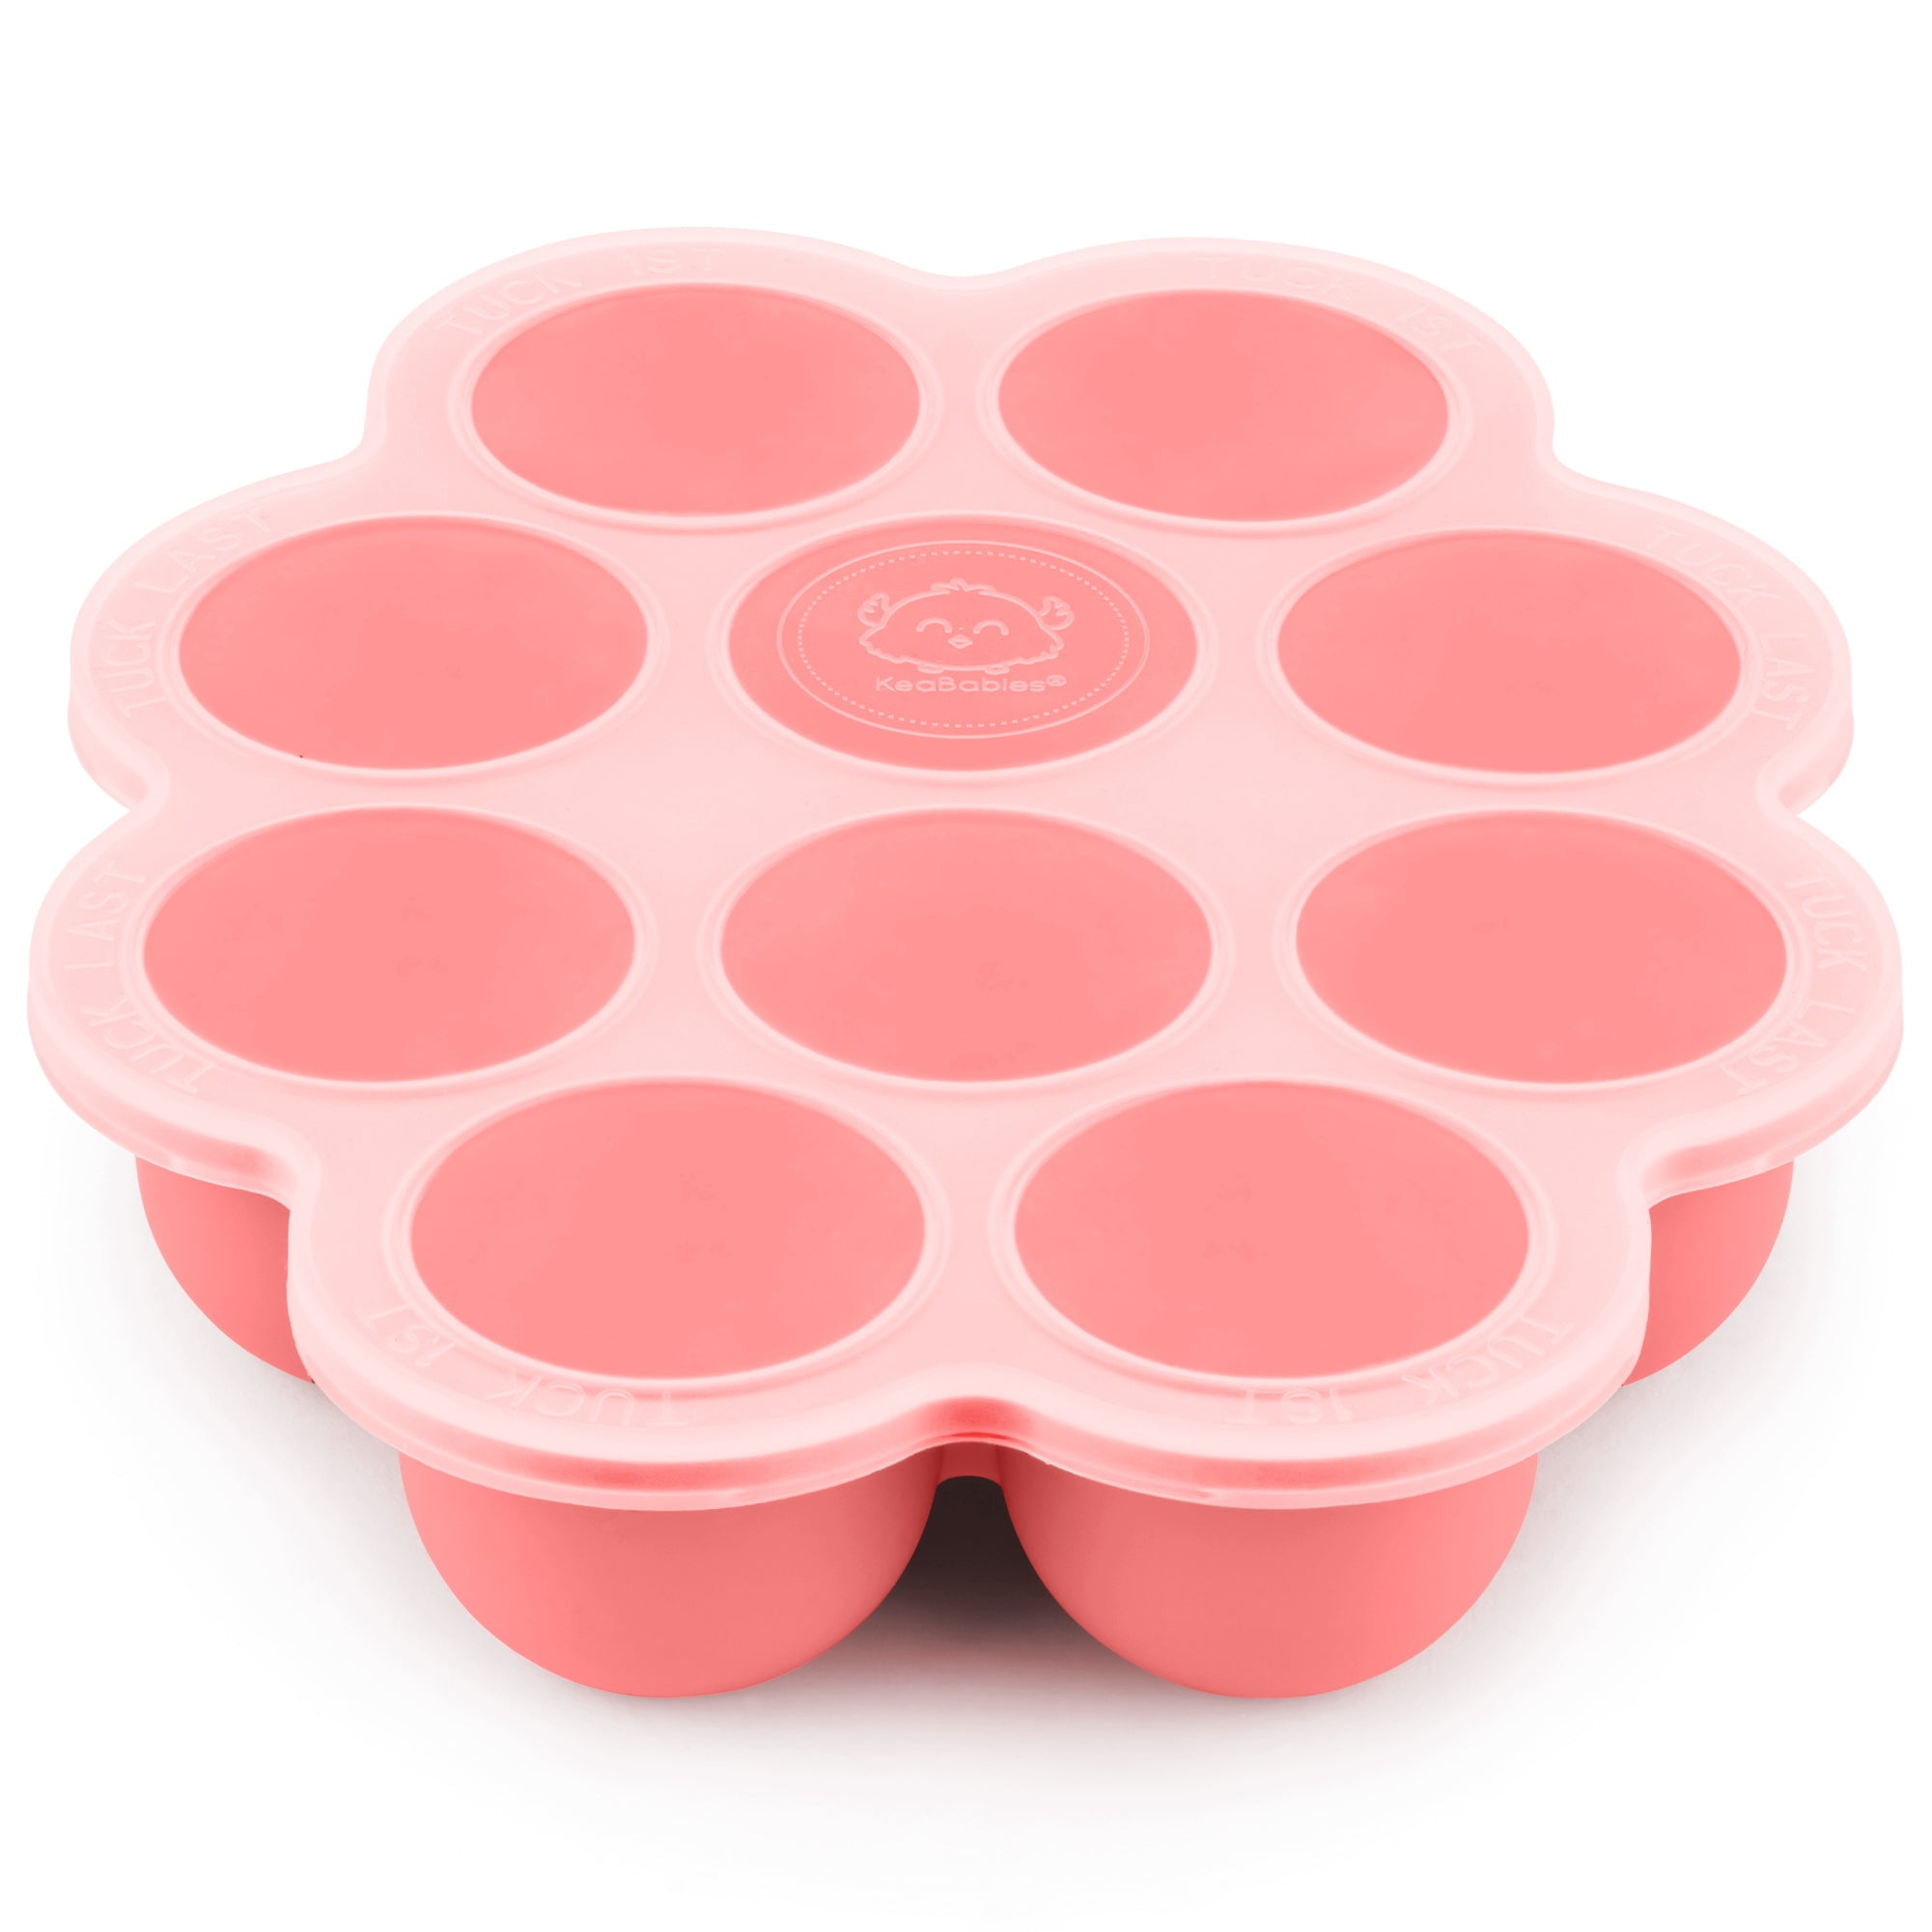 Prep Silicone Baby Food Freezer Tray With Clip-on Lid, 2oz X